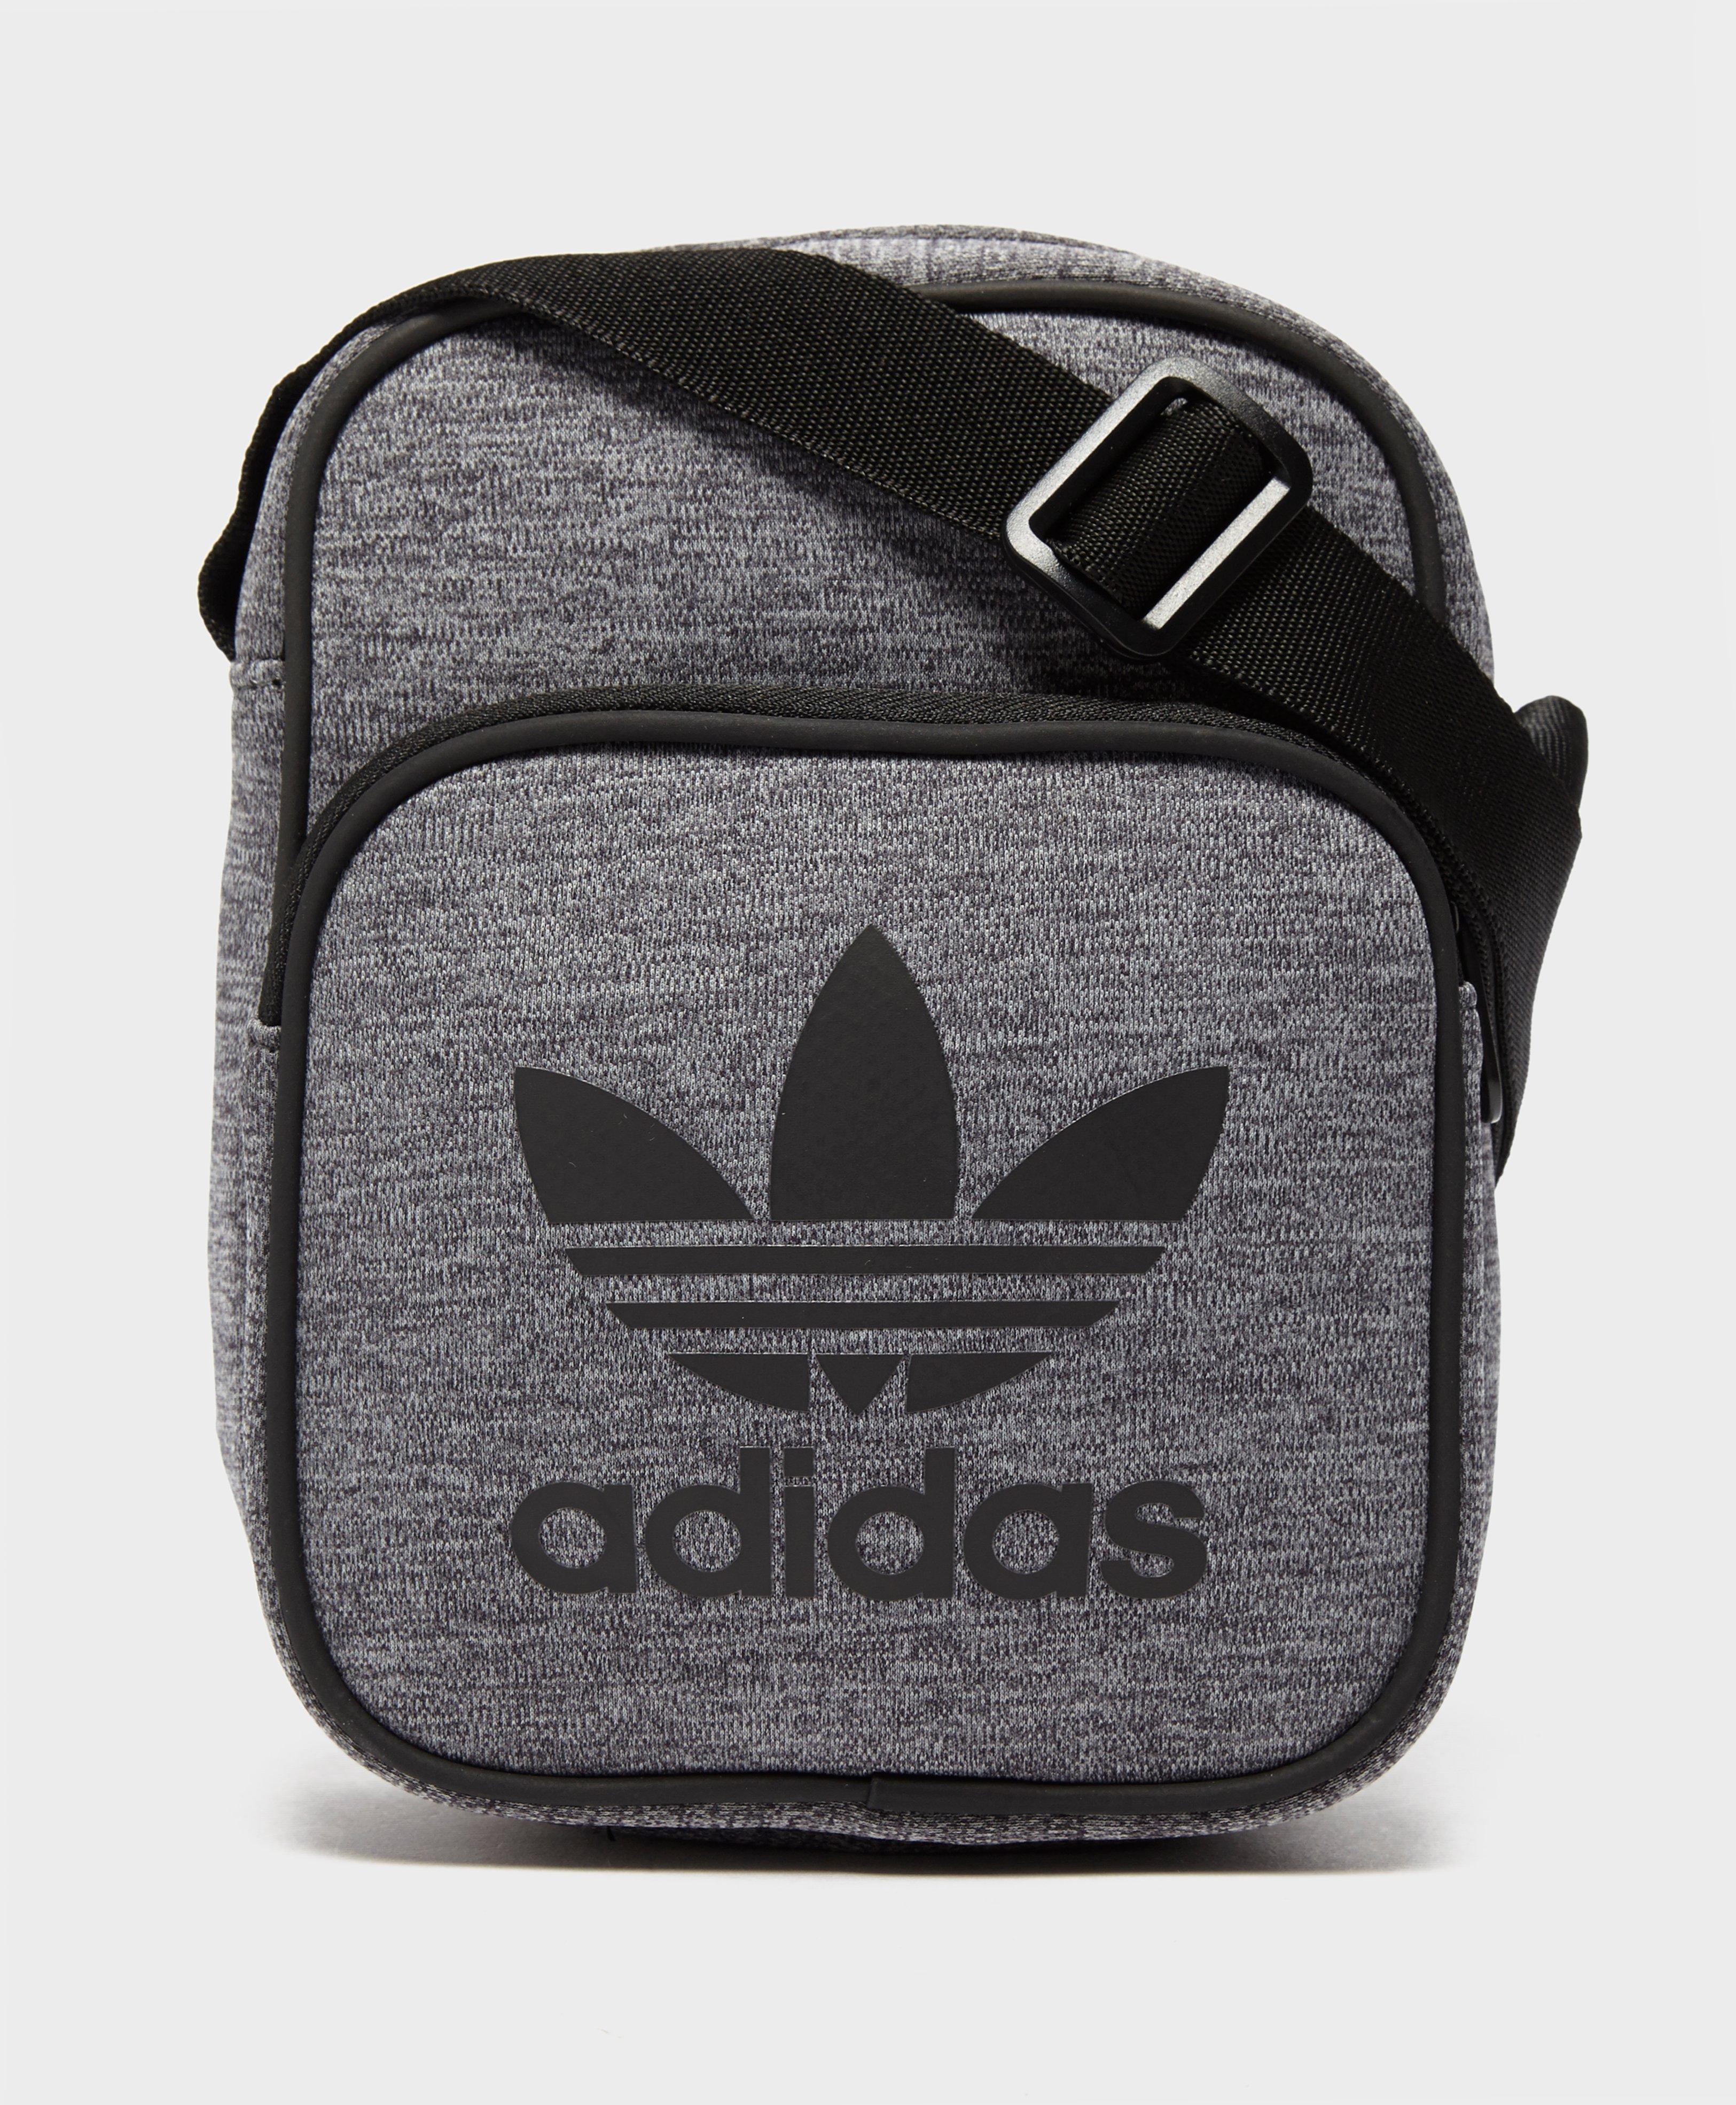 adidas Originals Synthetic Jersey Mini Bag in Gray for Men - Lyst